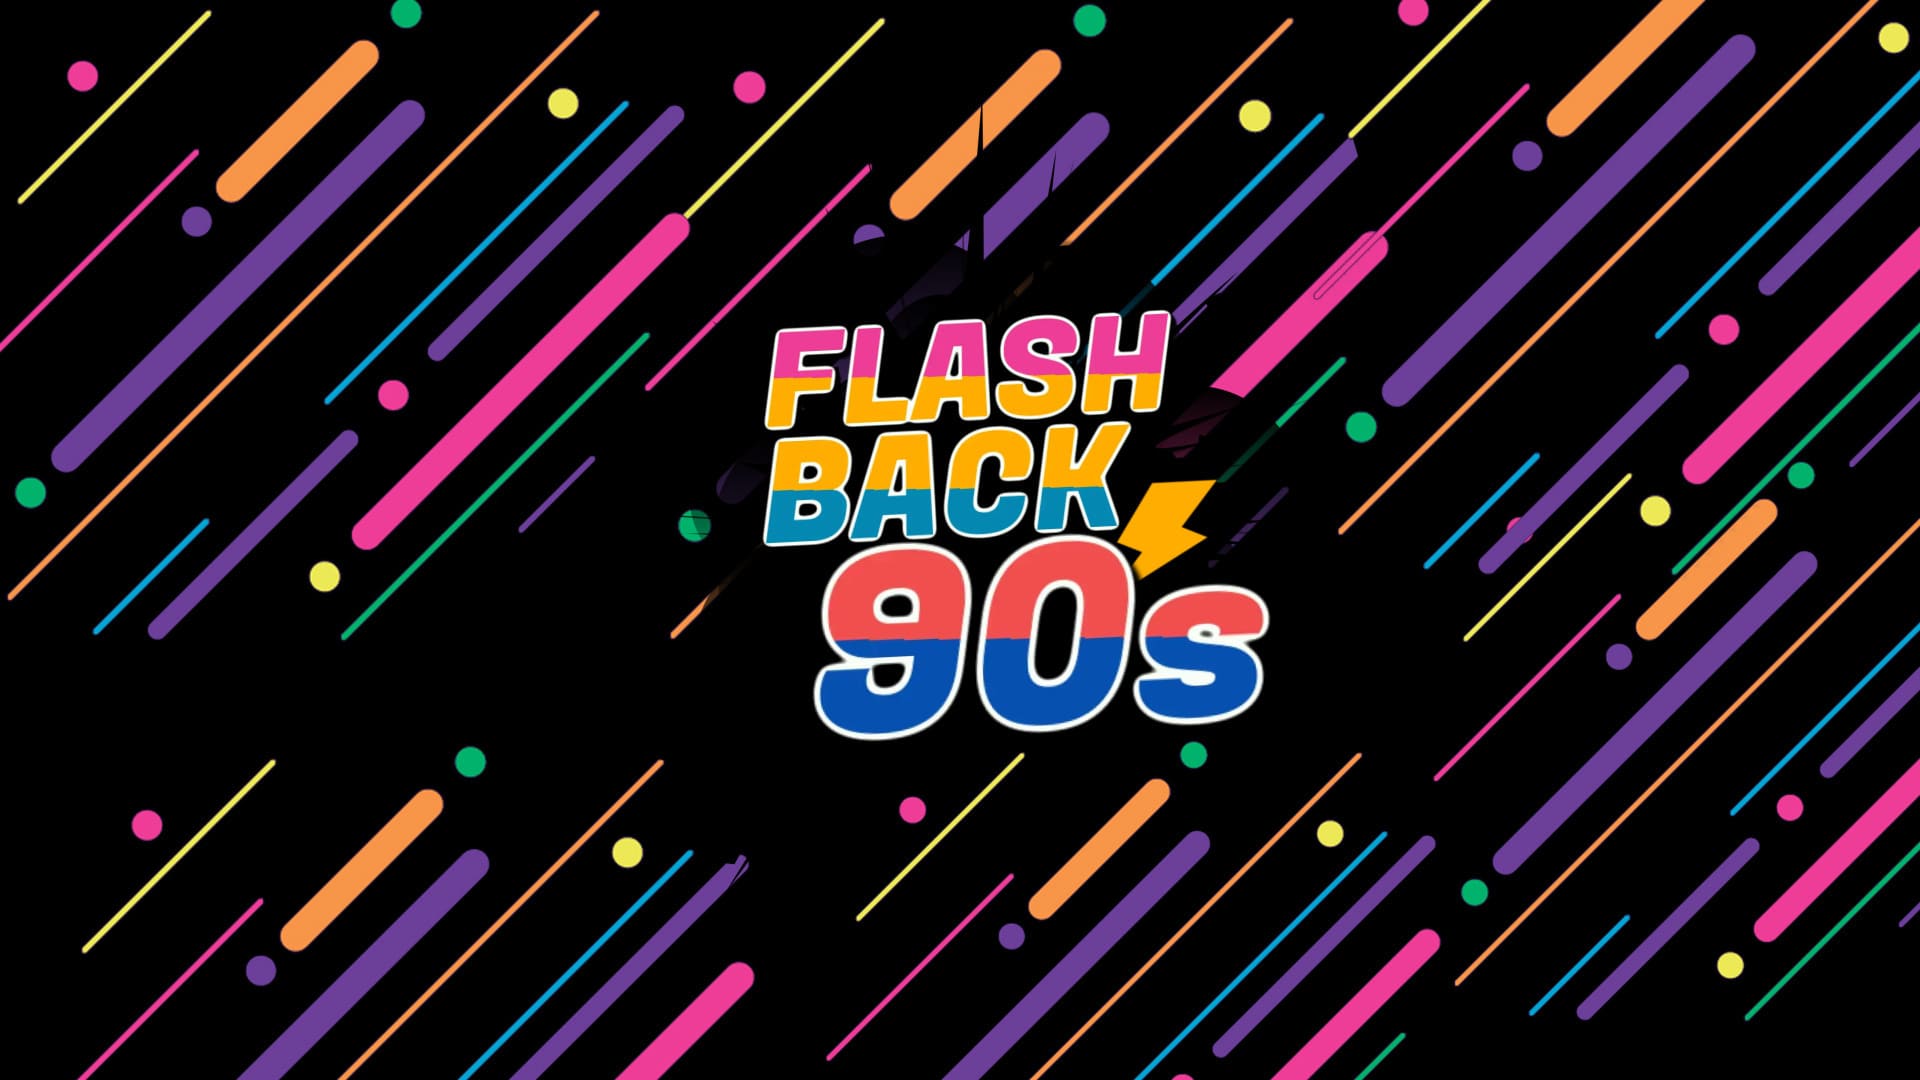 Flash Back 90s Party